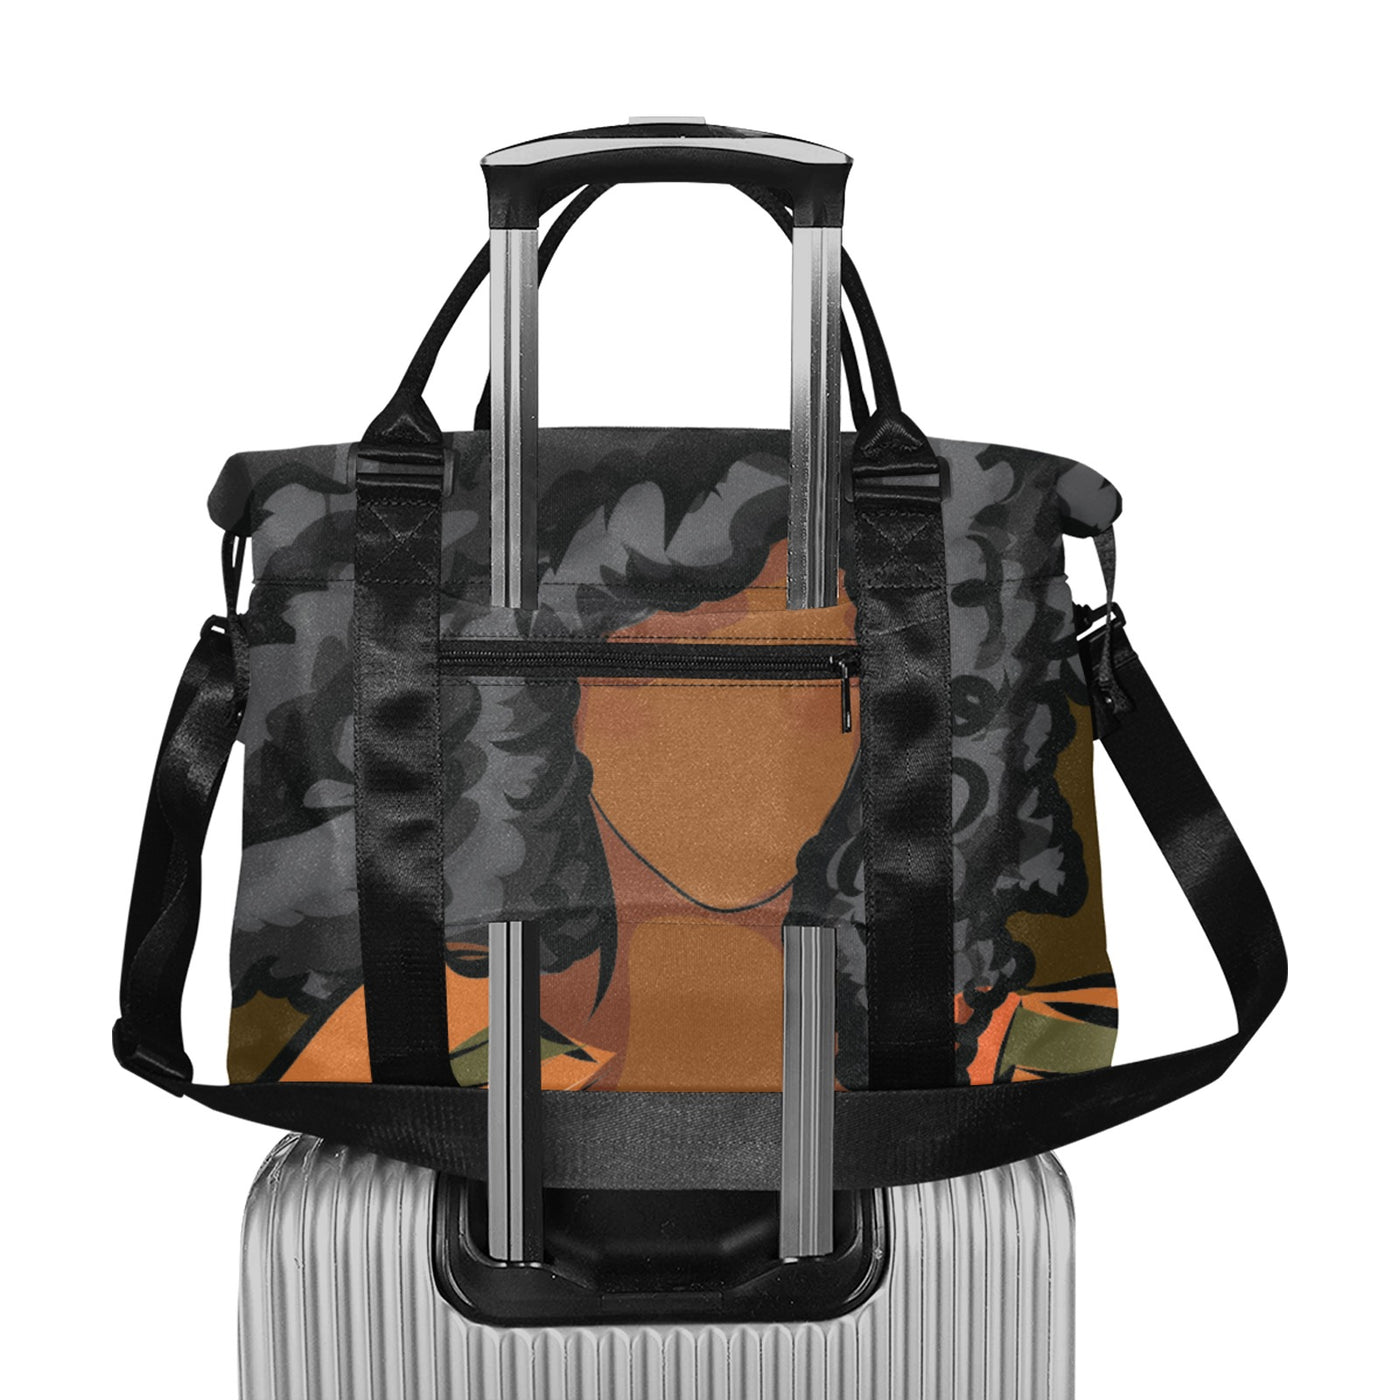 Unapologetic  Large Travel Bag